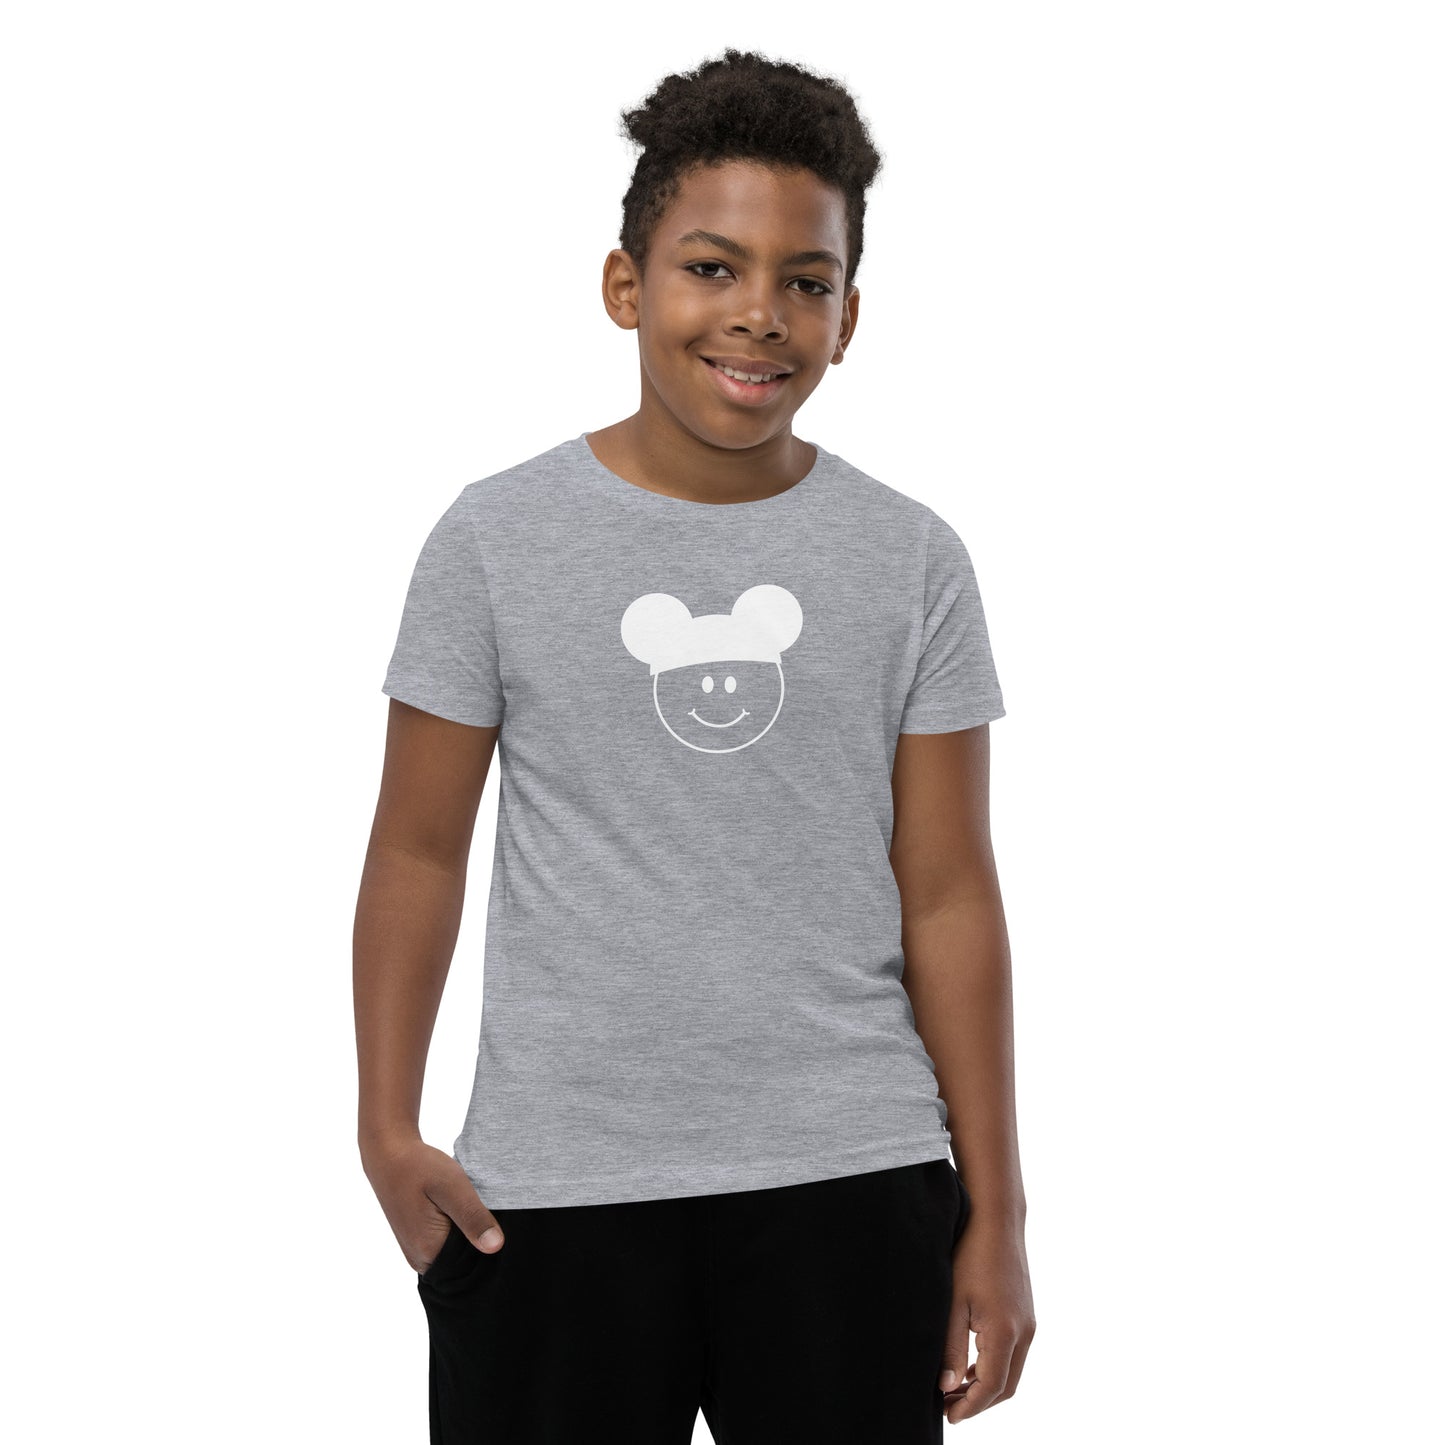 Groovy Smiles Front and Back Youth Short Sleeve T-Shirt